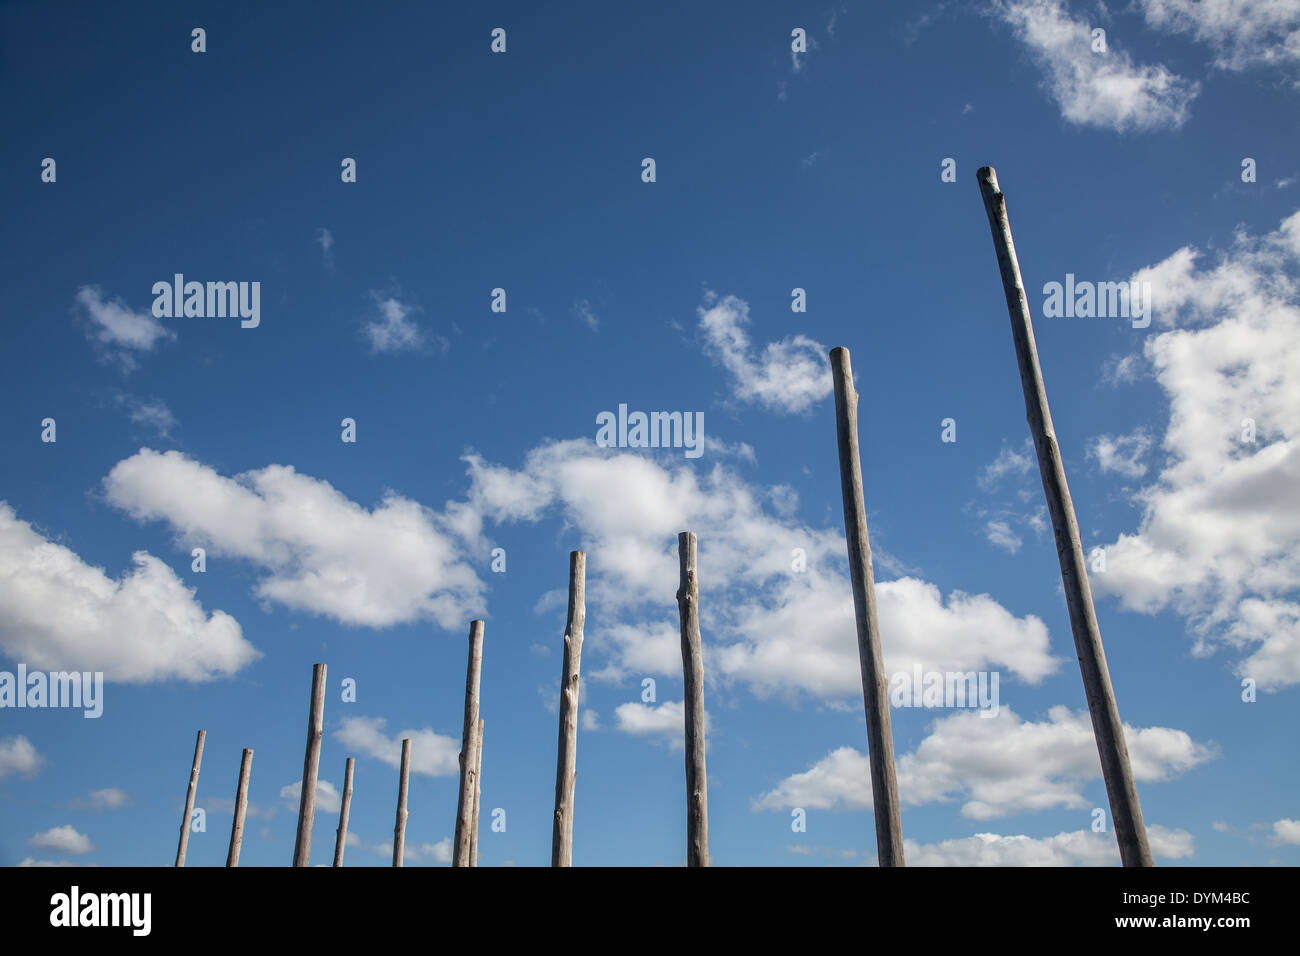 A series of timber poles against a blue sky that resembles a graph Stock Photo